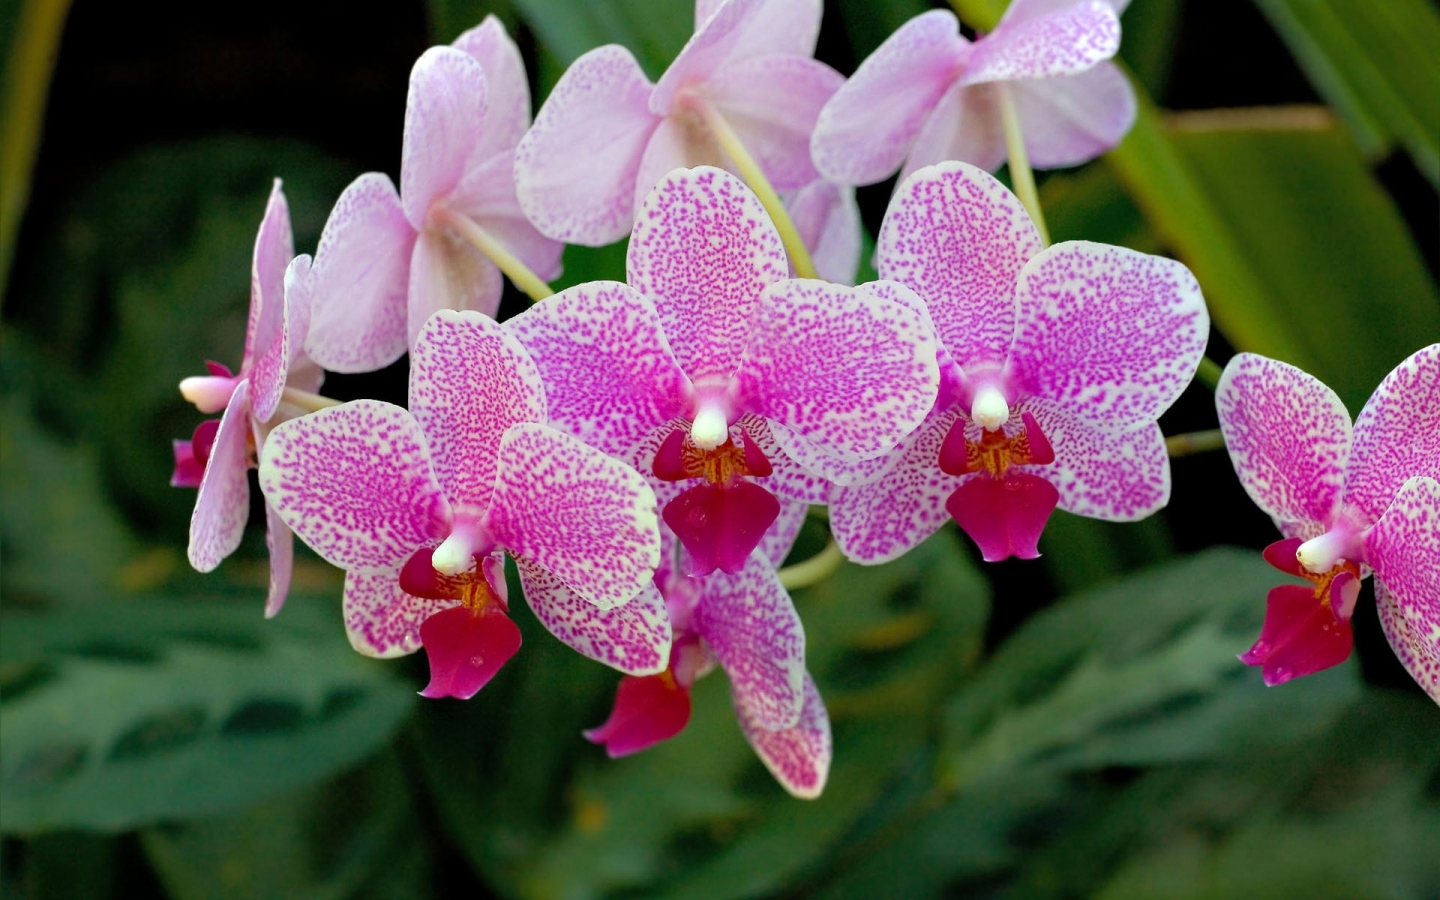 Incredible orchid branch for 1440 x 900 widescreen resolution